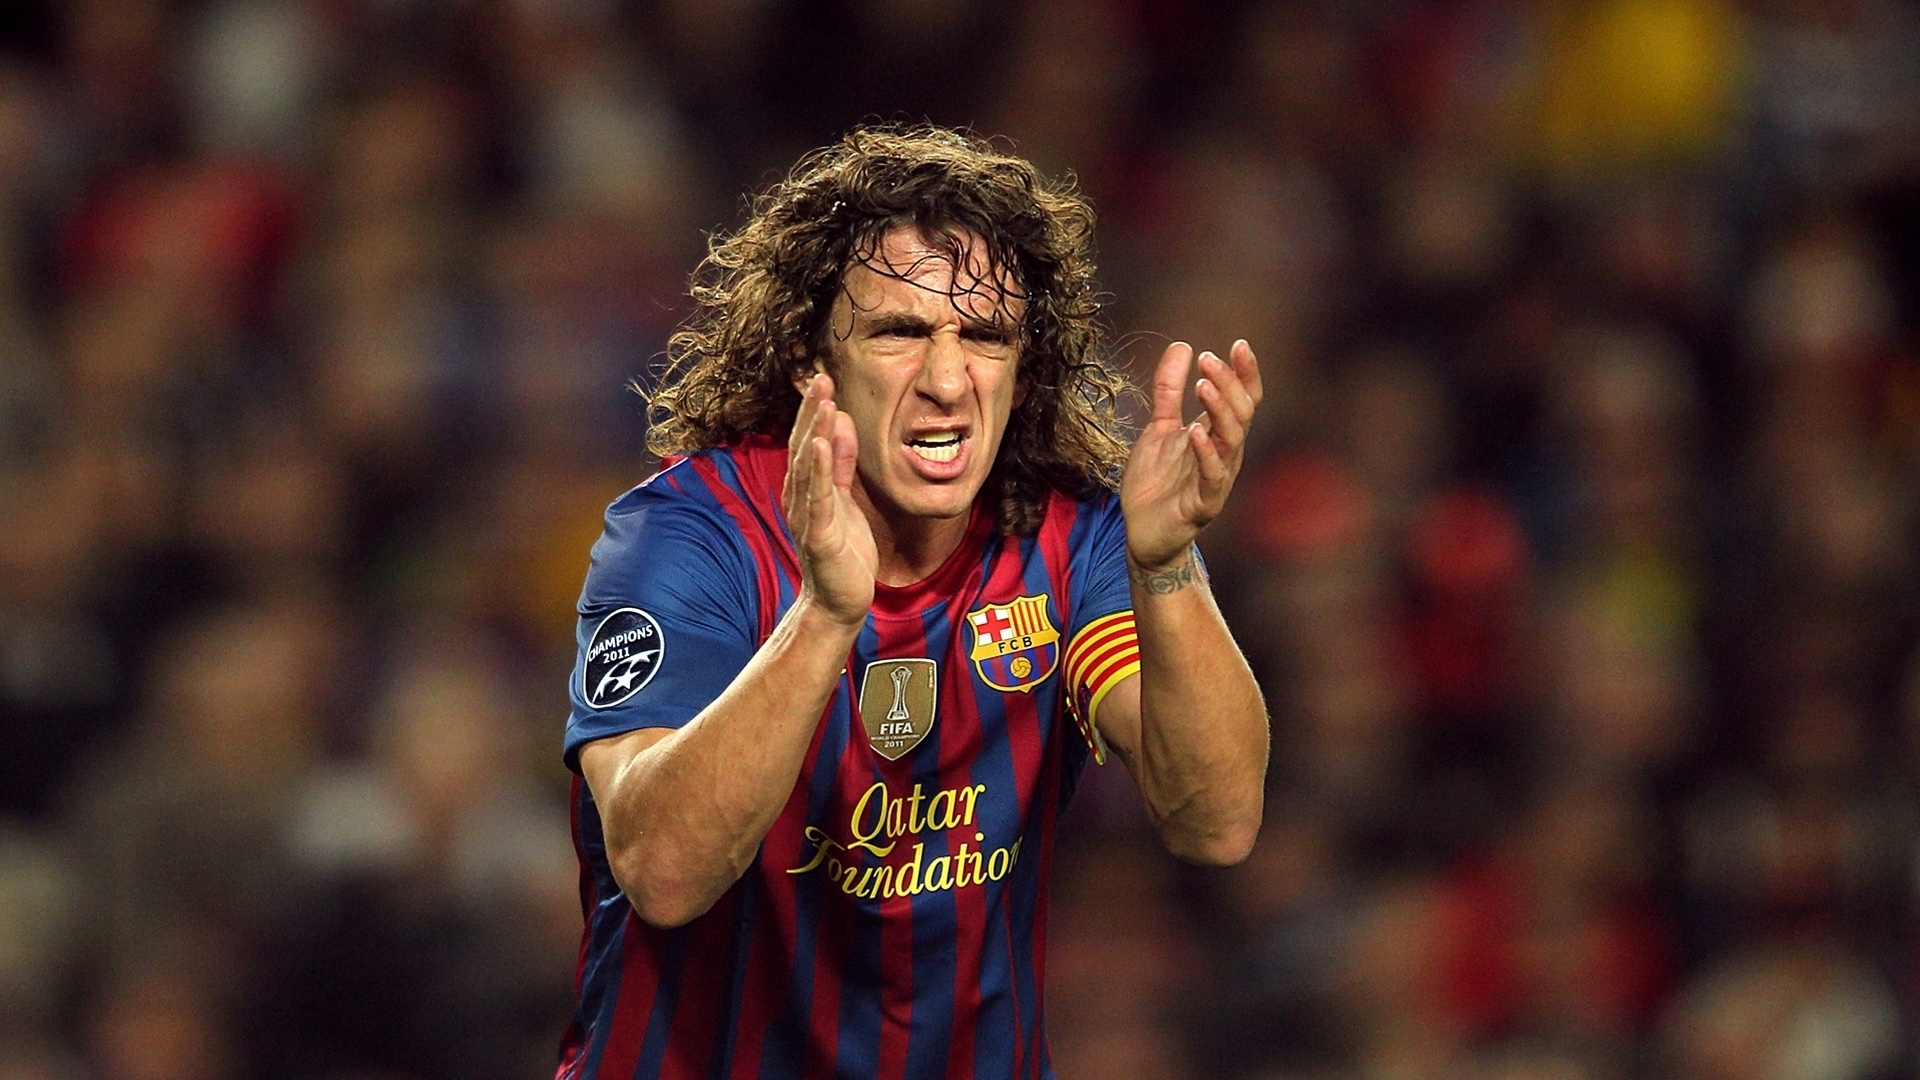 Carles Puyol Urging for 1920 x 1080 HDTV 1080p resolution